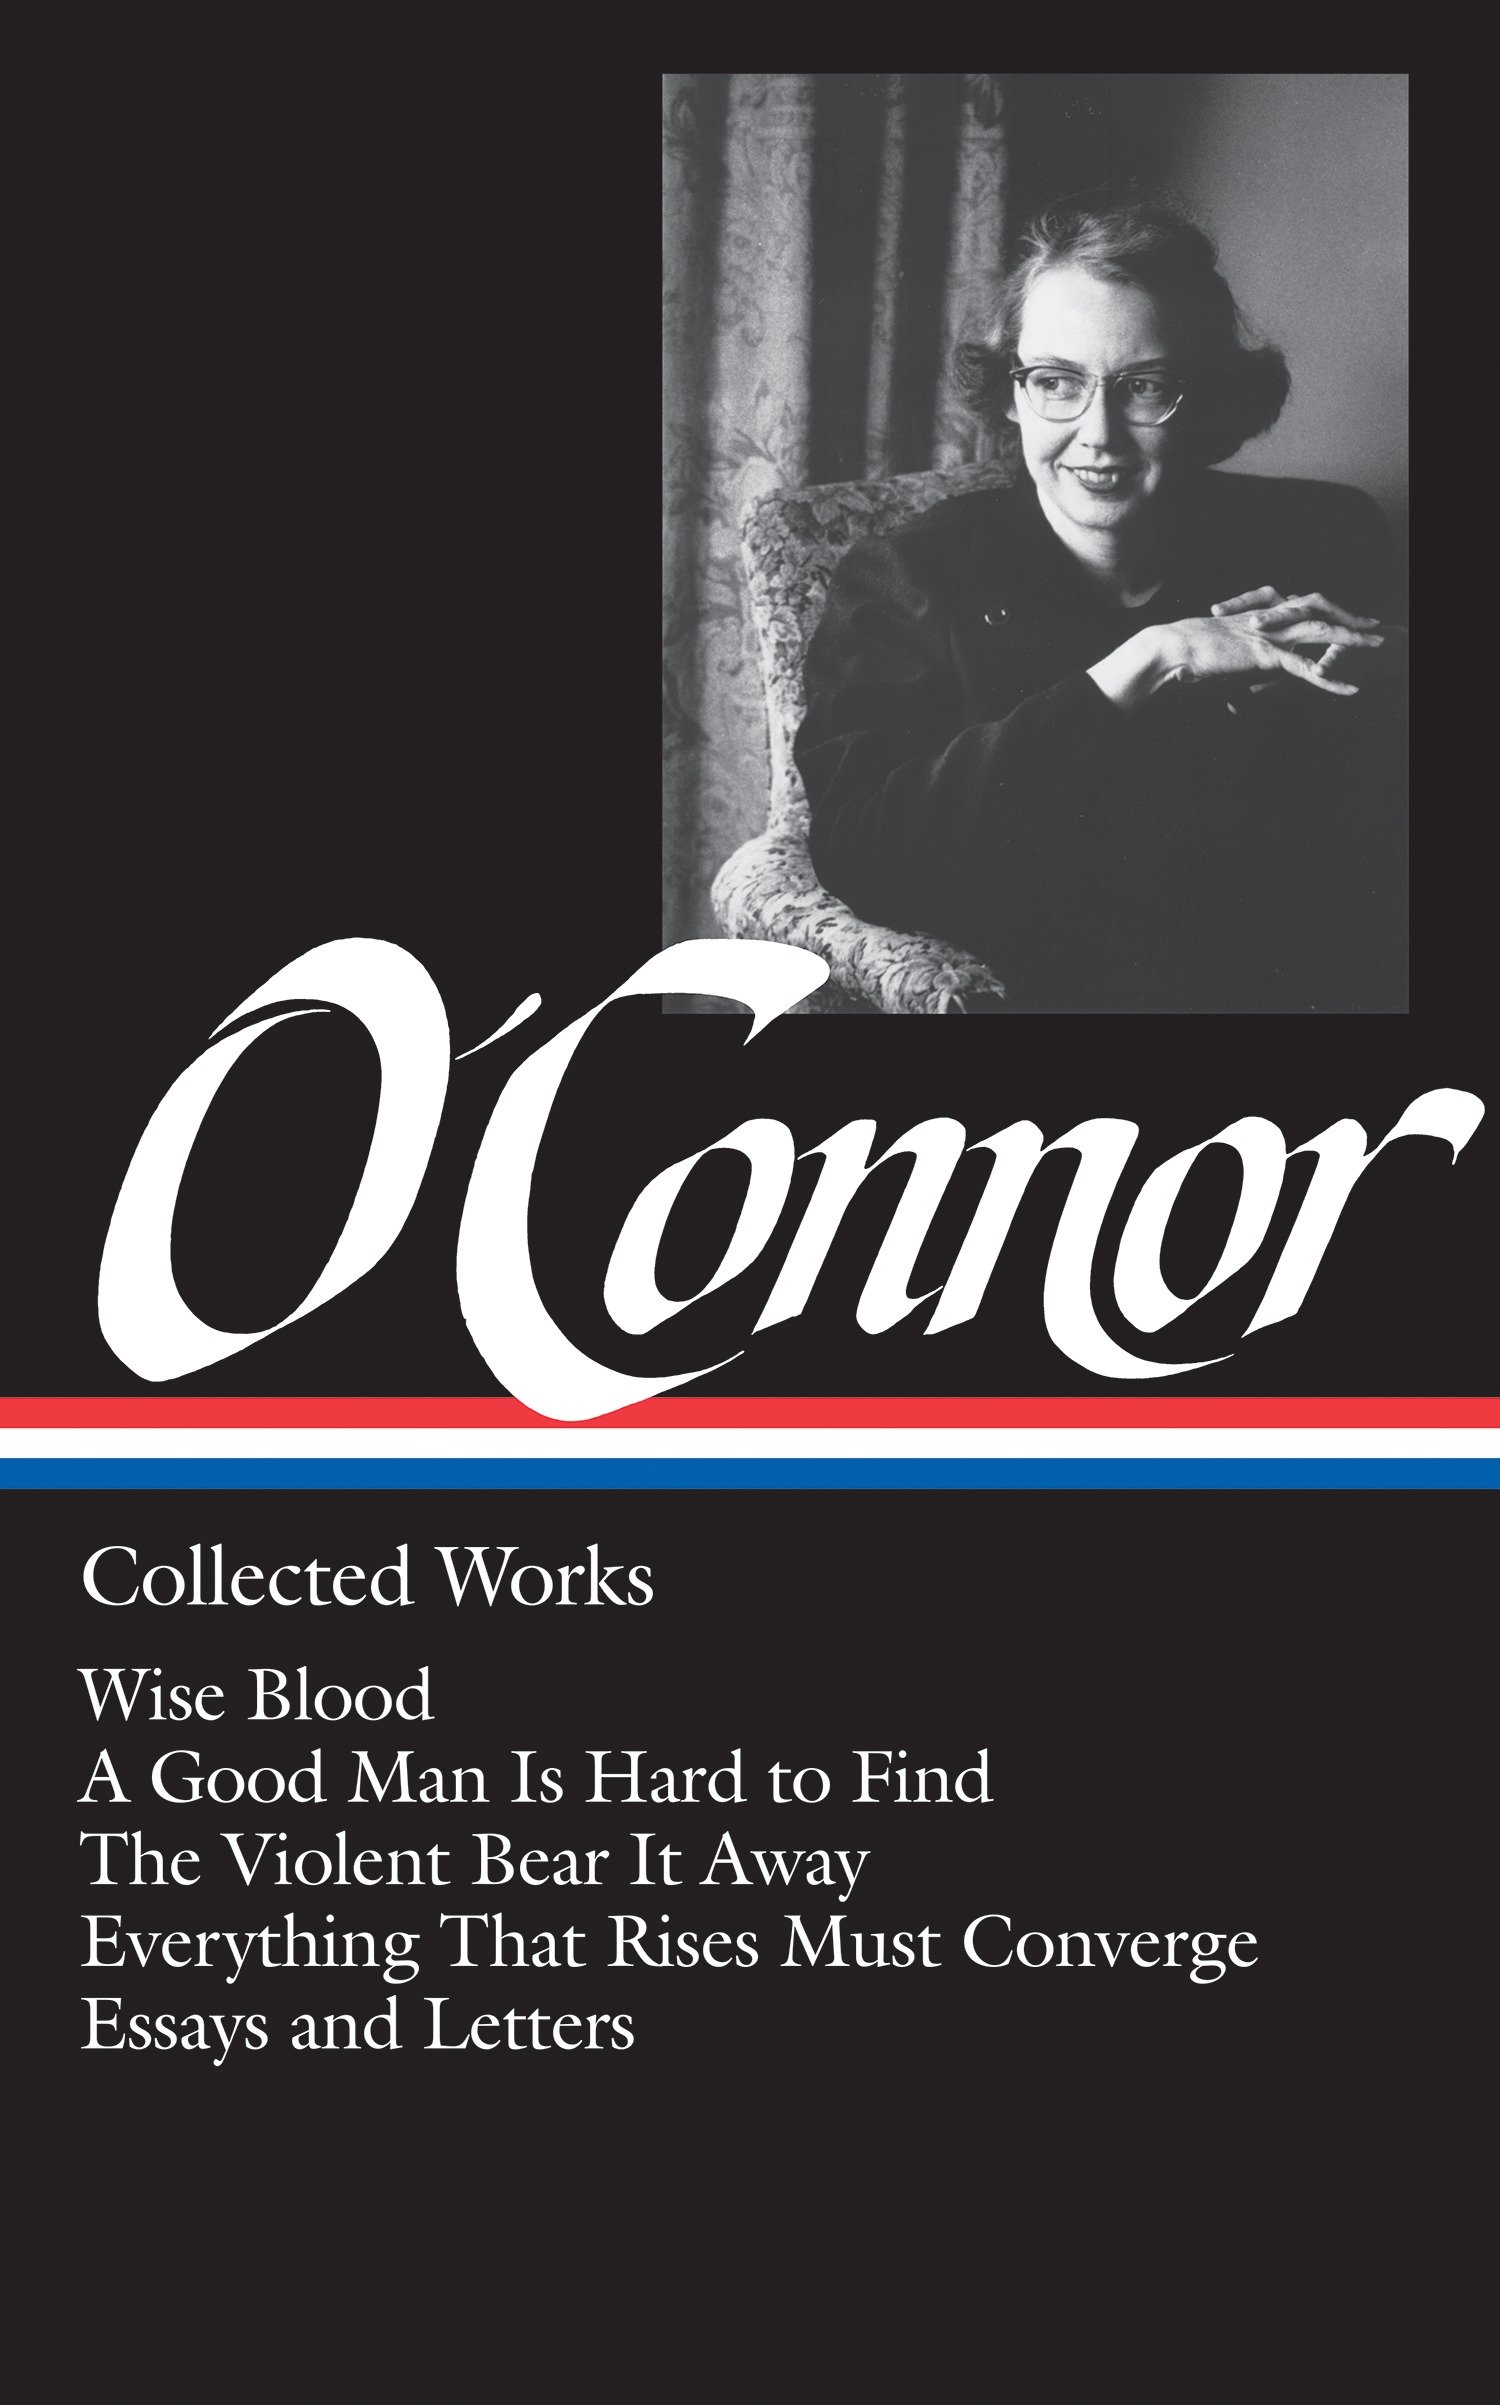 Flannery O'Connor: Collected Works (Loa #39) (Hardcover Book)